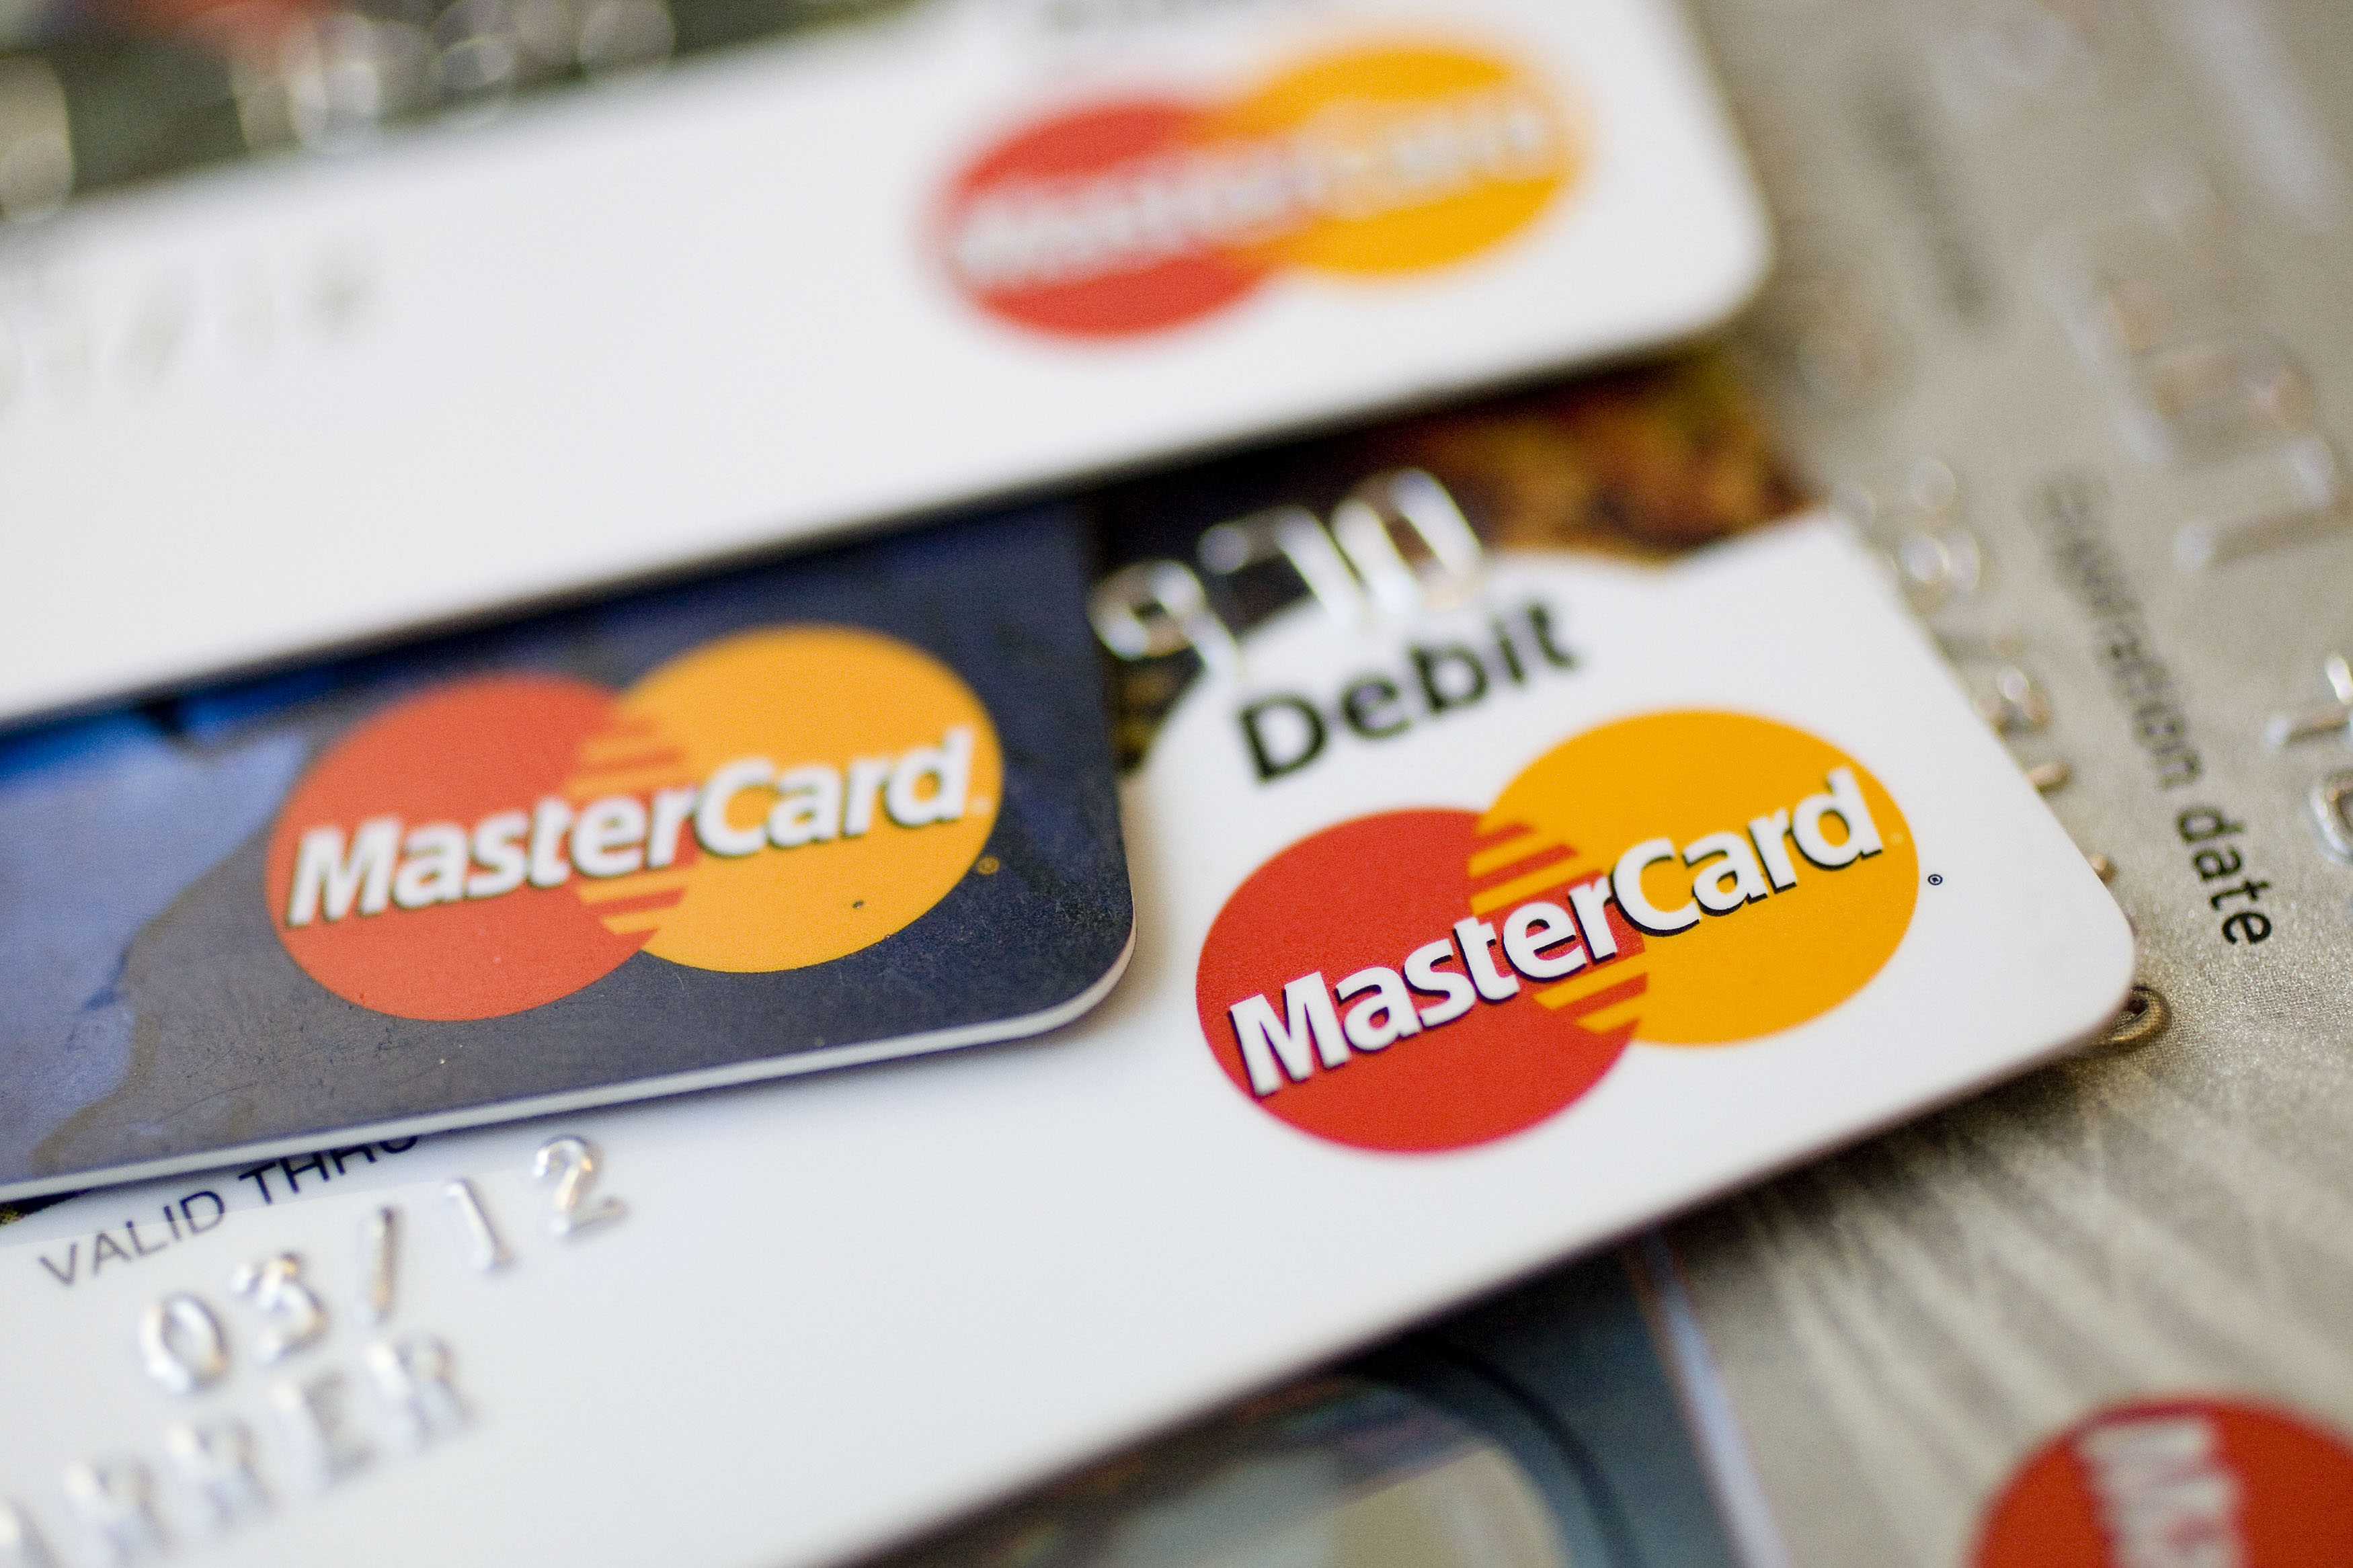 MasterCard logos appear on credit and debit cards arranged f